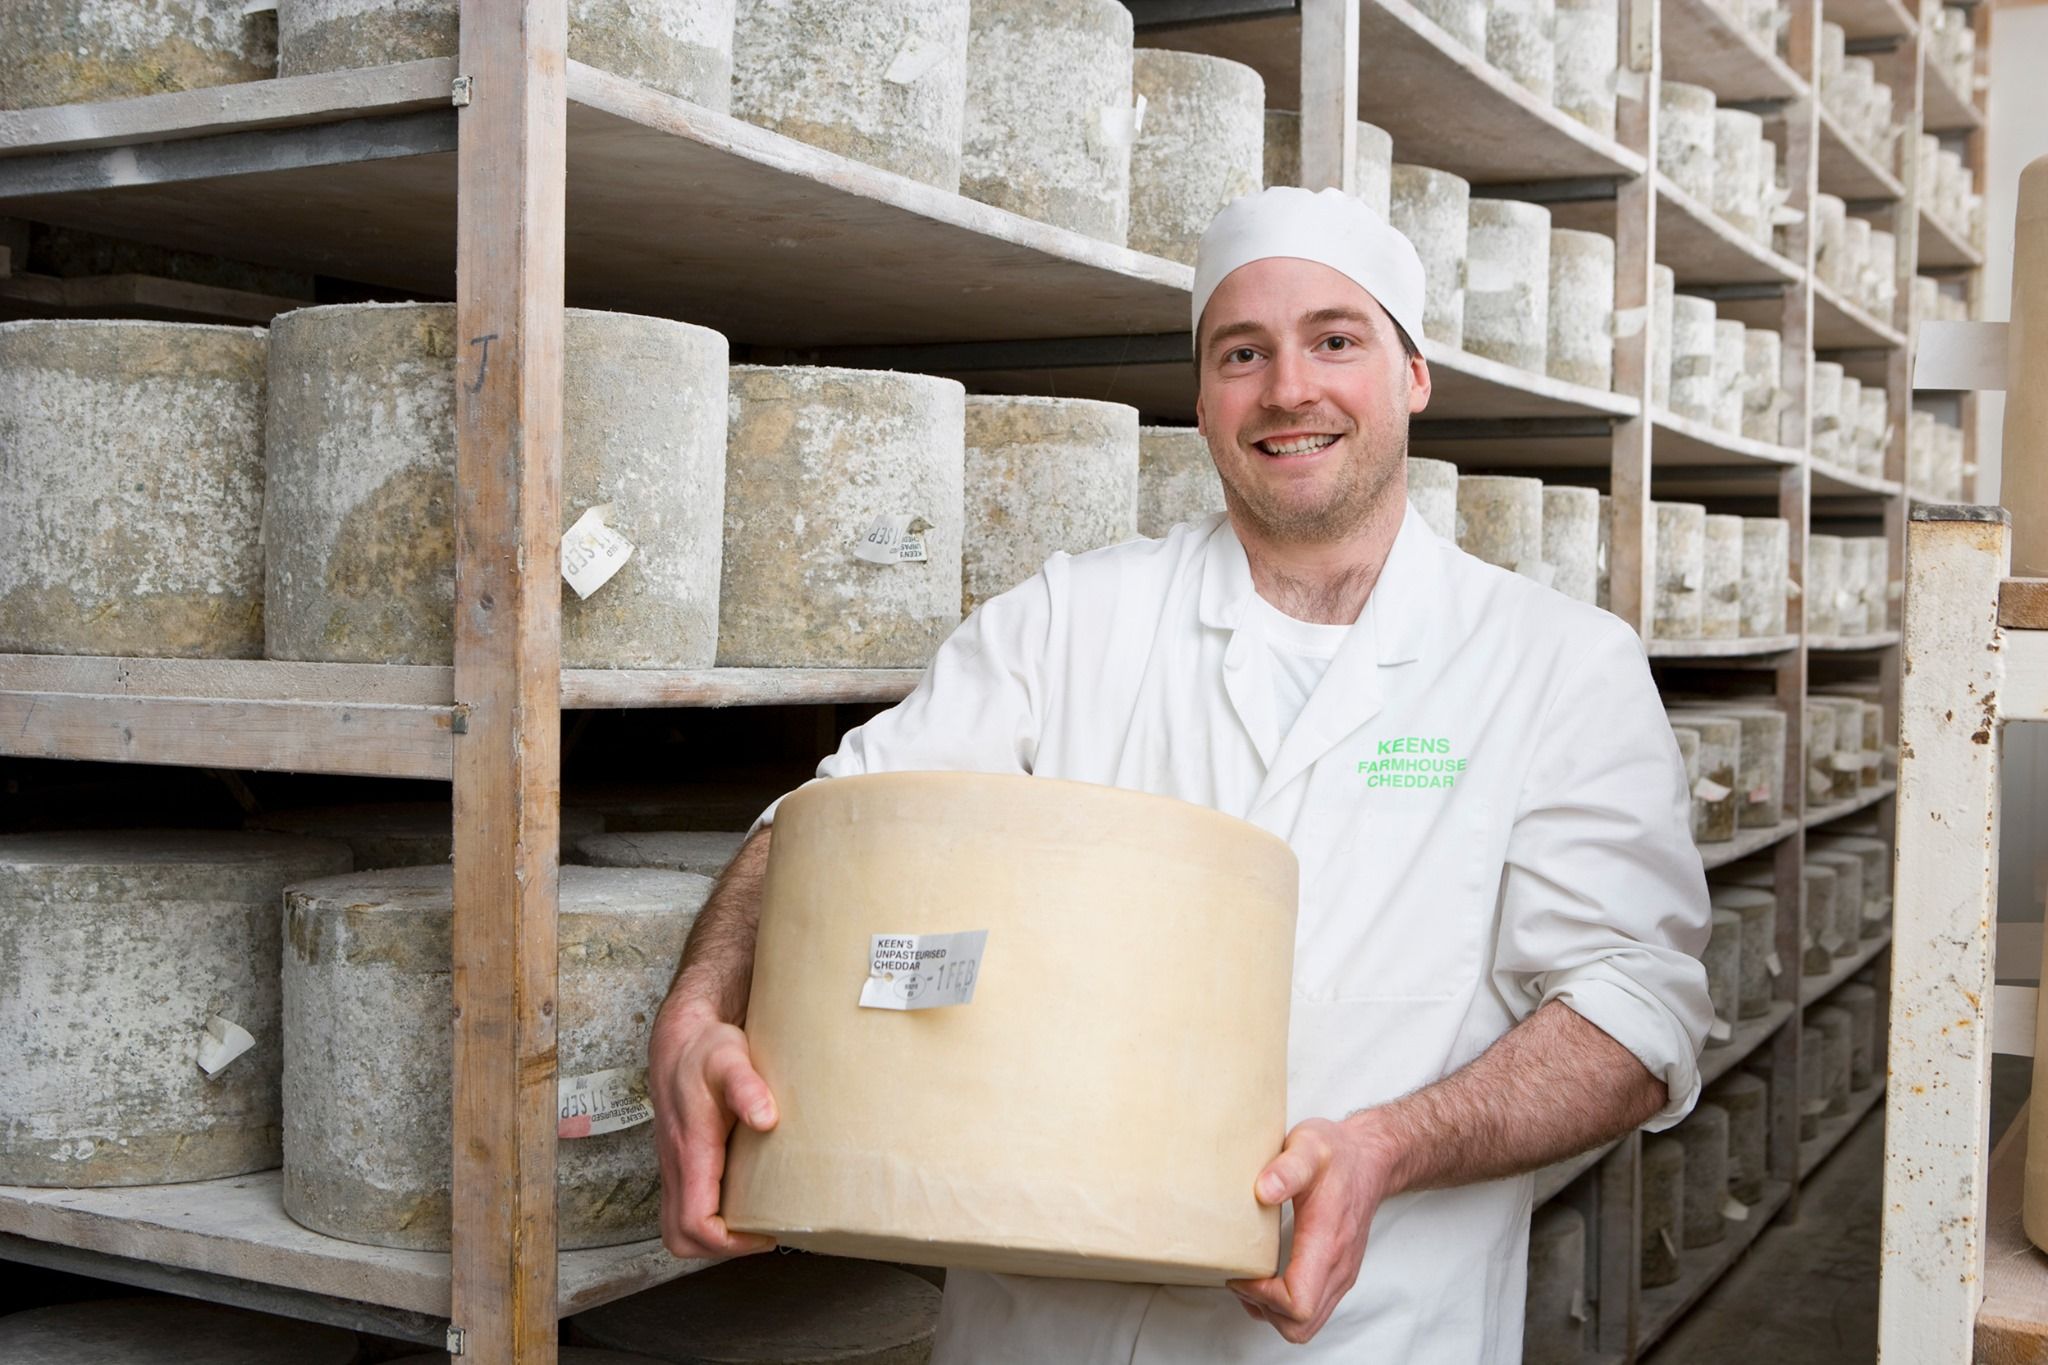 Whey to go! Keen's Cheddar crowned Supreme Champion at the Virtual Cheese Awards 2022